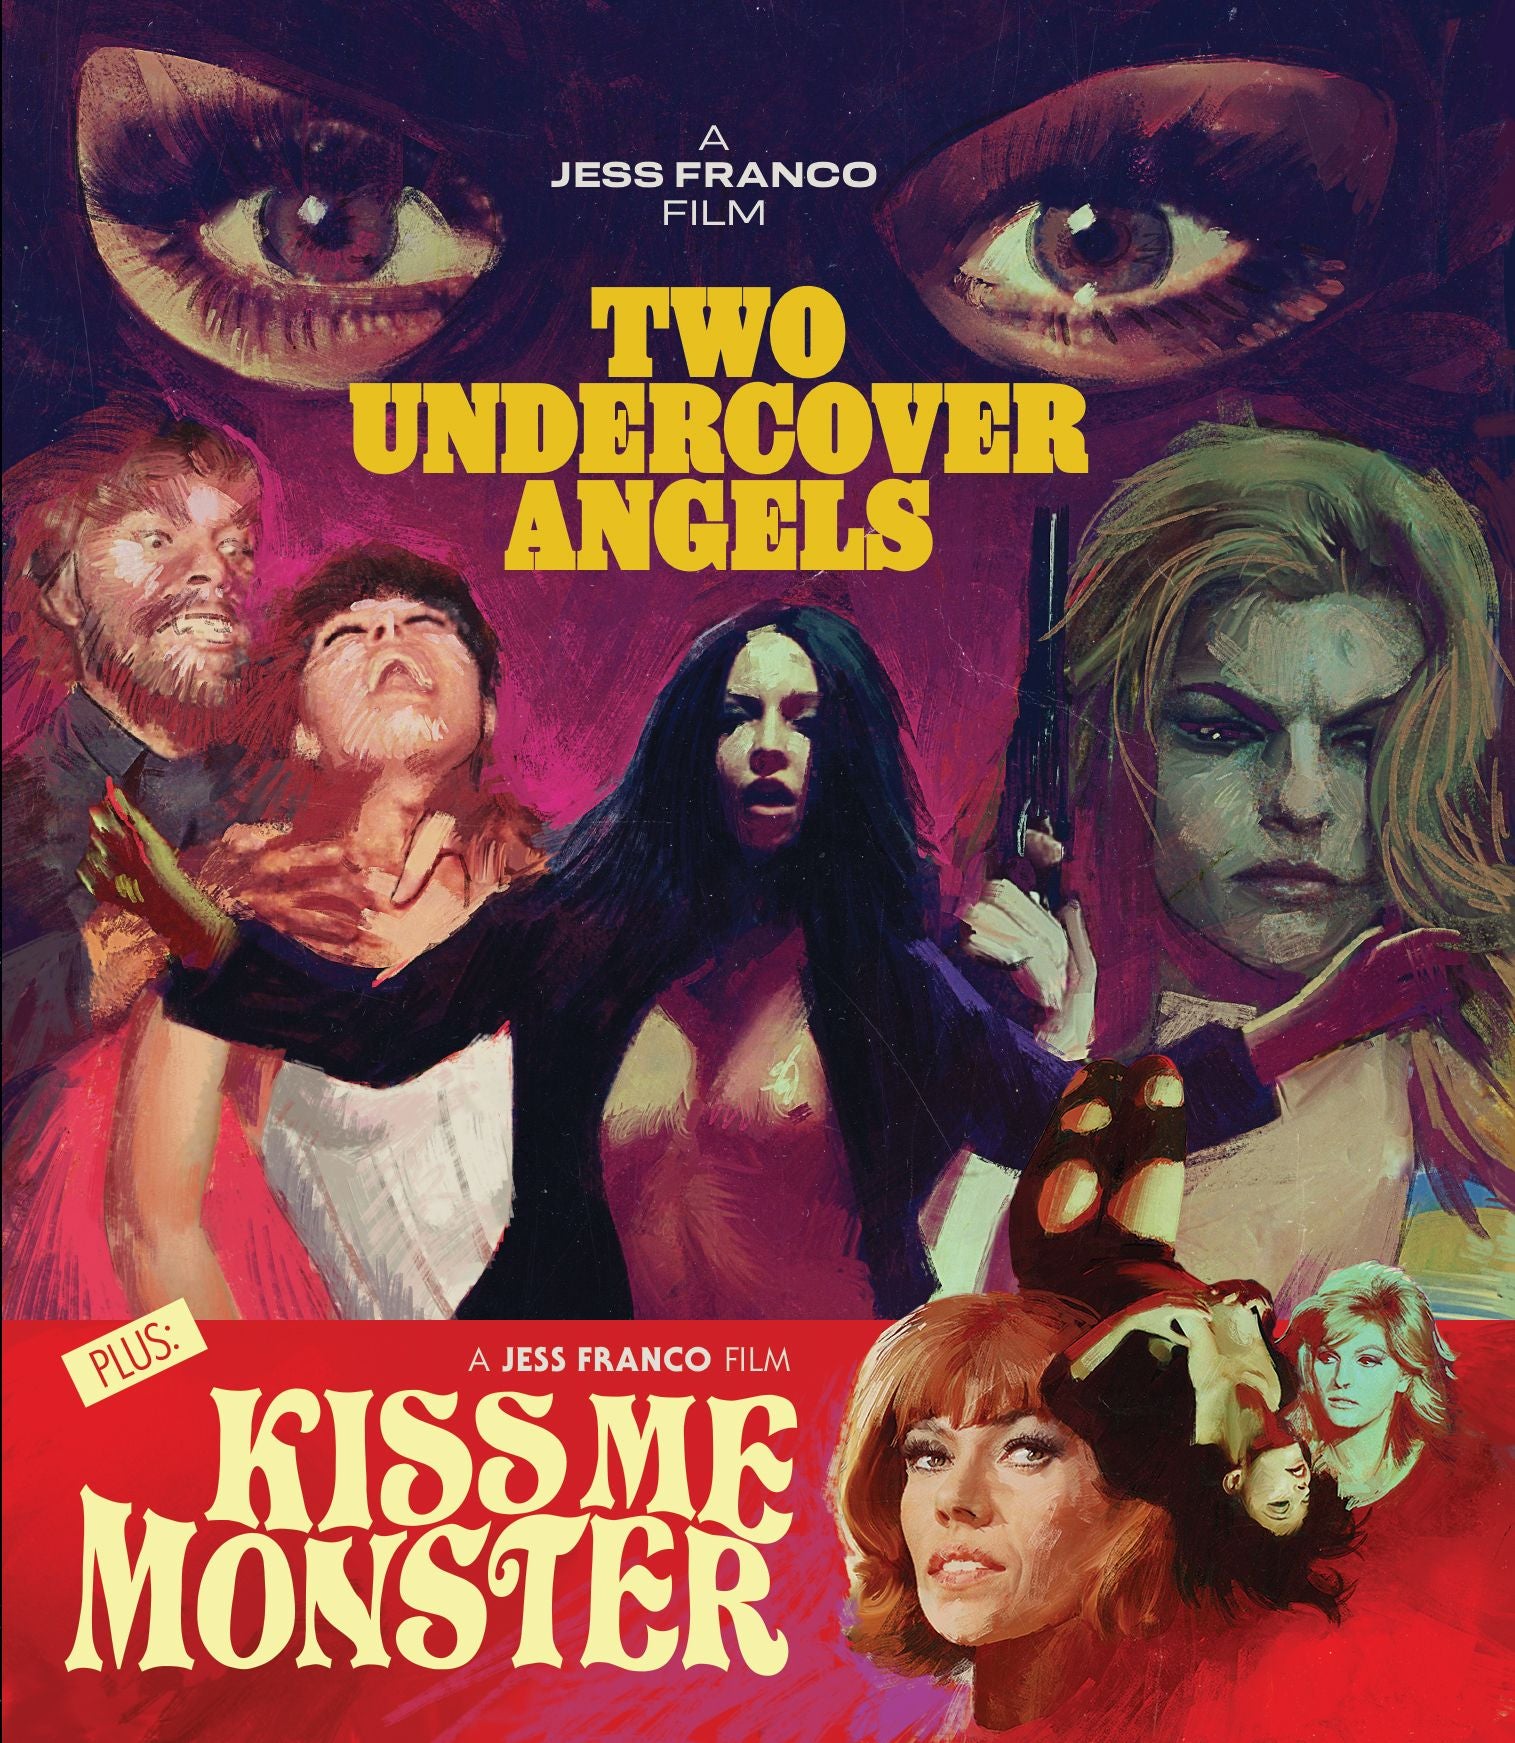 TWO UNDERCOVER ANGELS / KISS ME MONSTER BLU-RAY